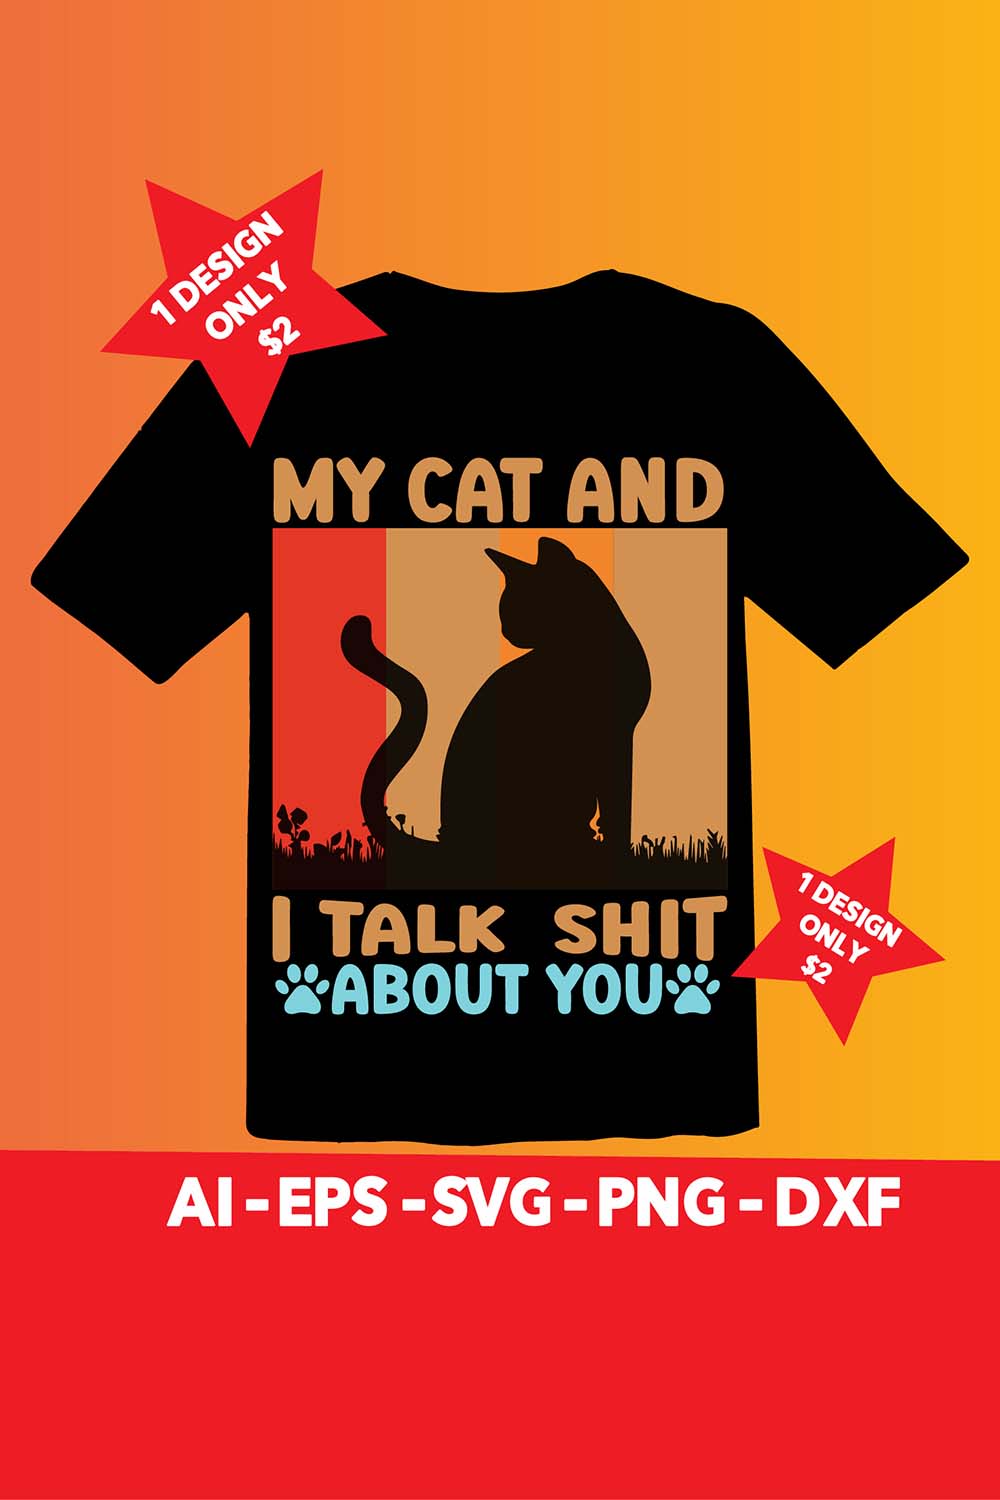 Image of t-shirt with amazing cat silhouette print